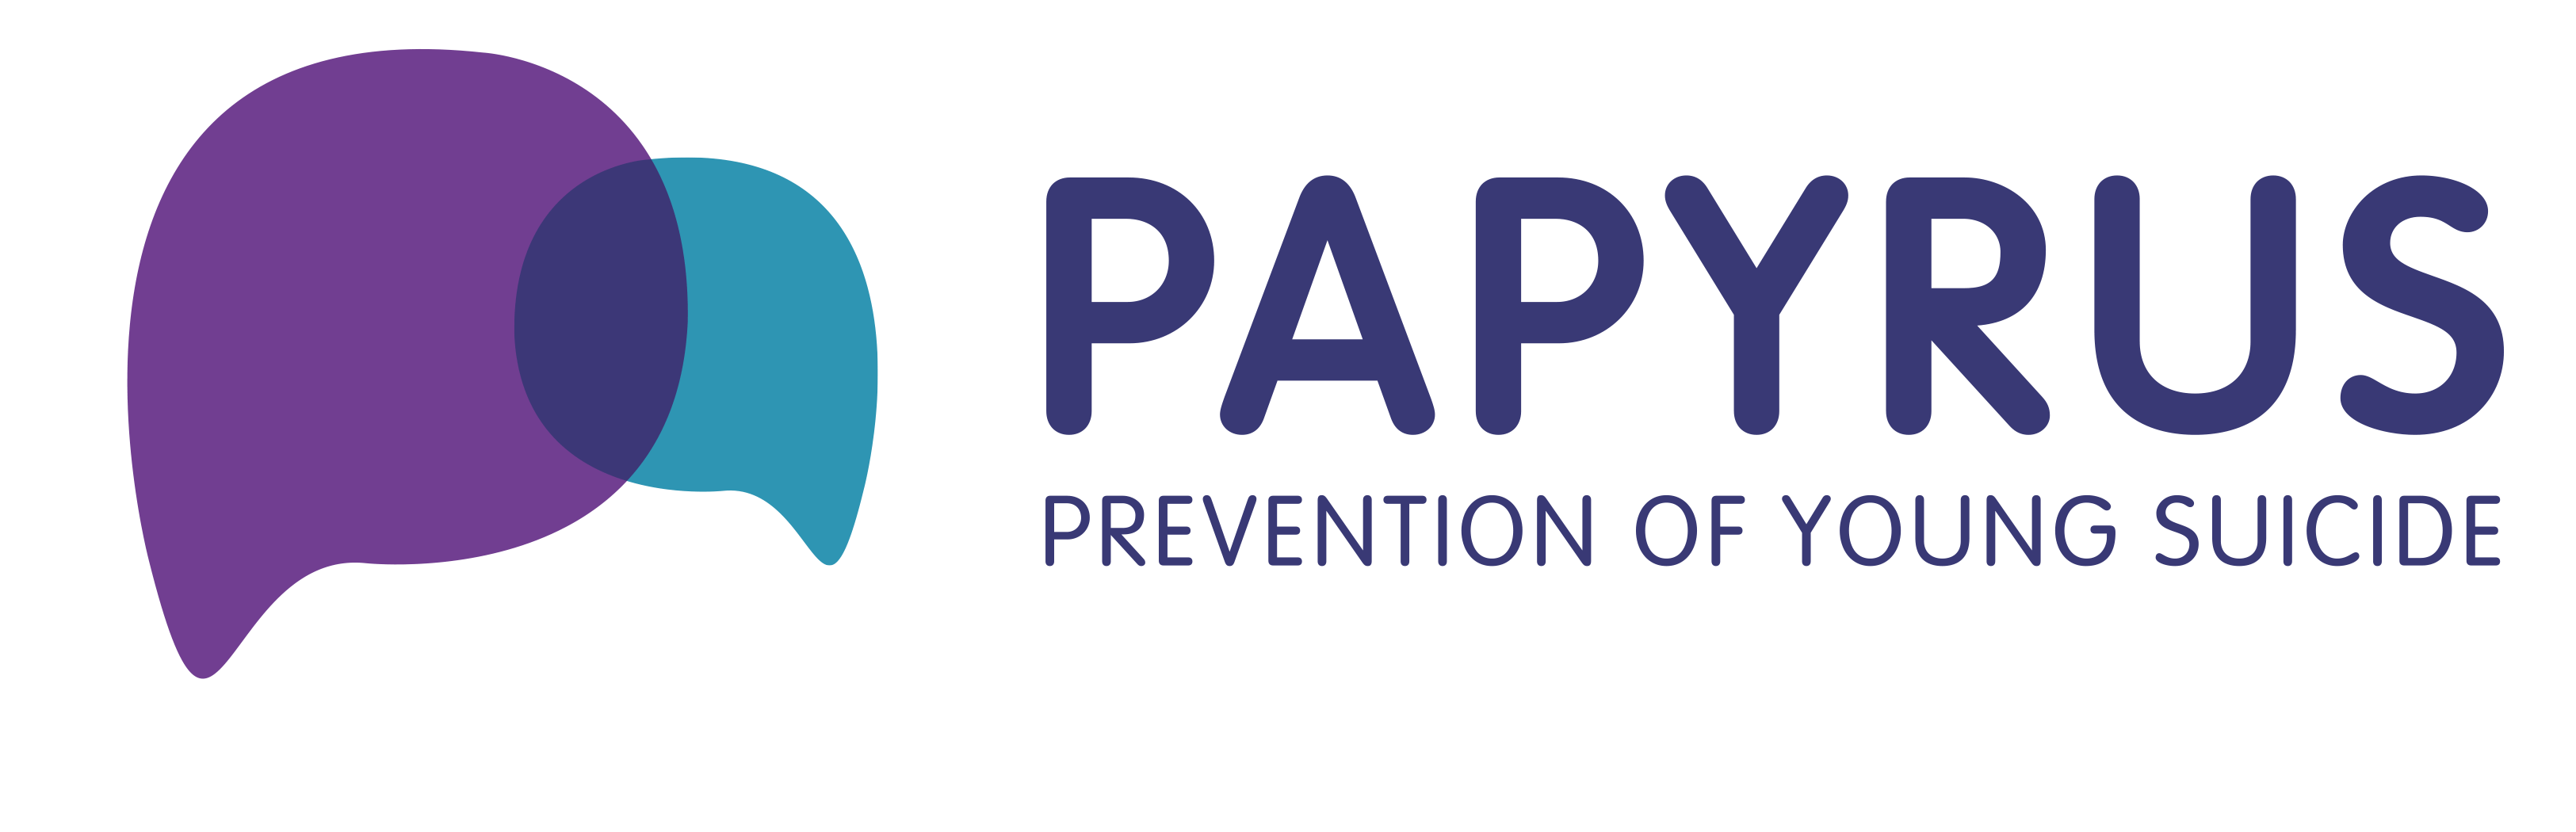 PAPYRUS - Prevention of Young Suicide logo